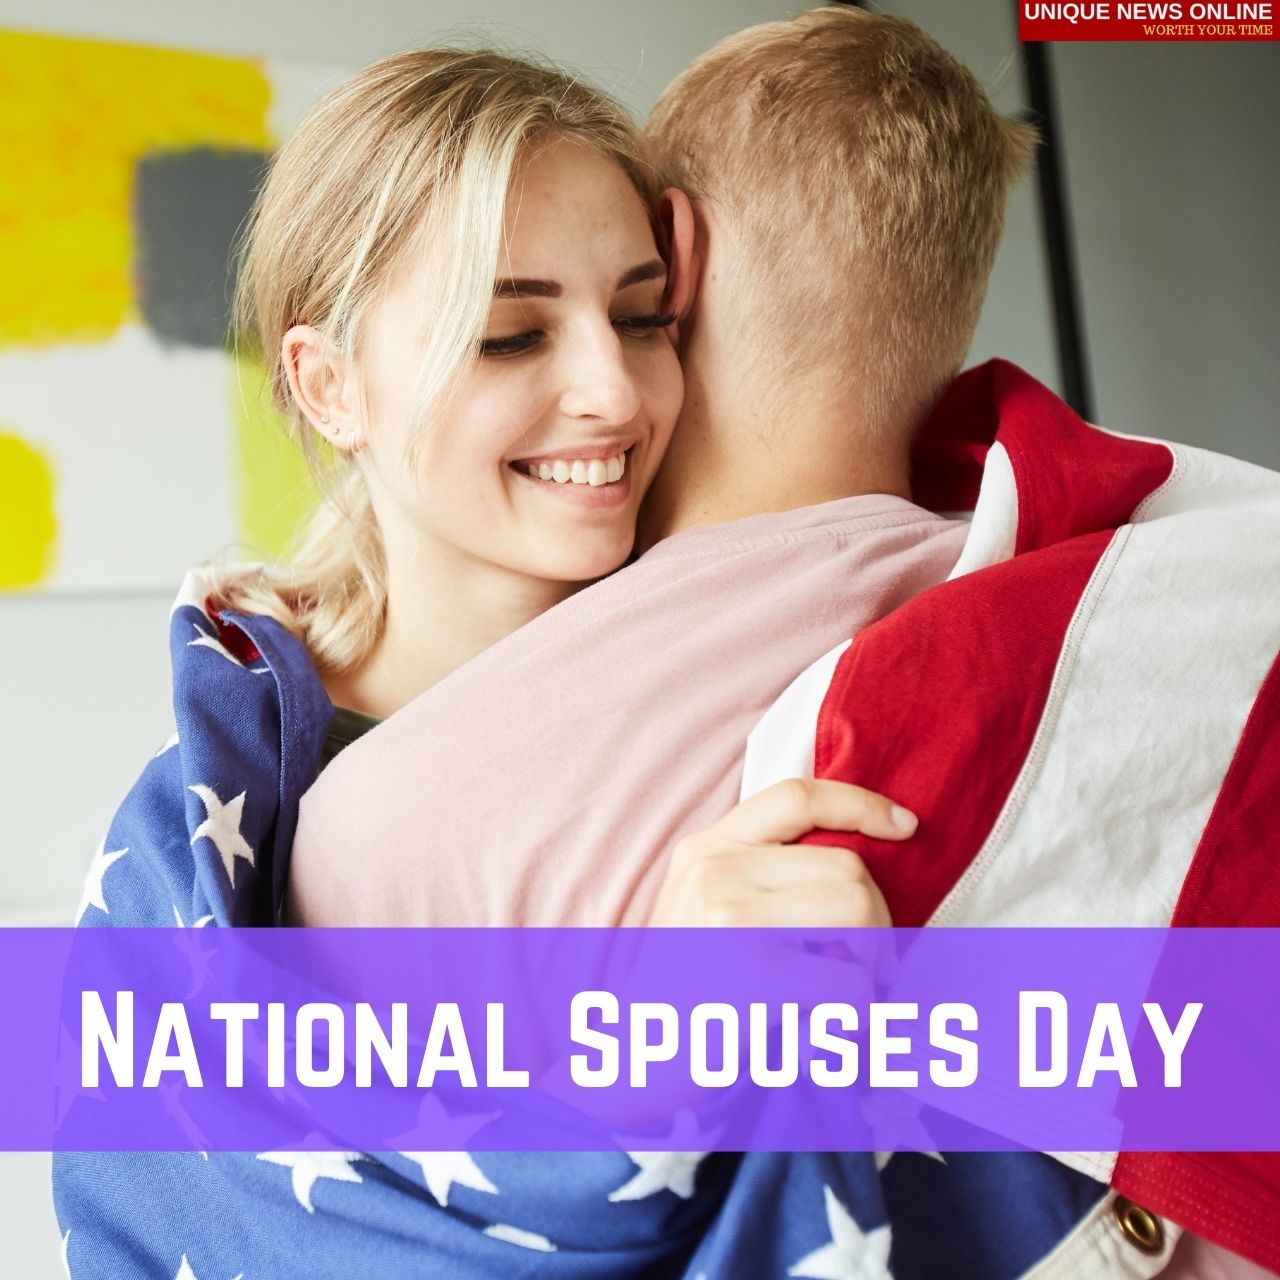 National Spouses Day (USA) 2022 Quotes, HD Images, Memes, Greetings